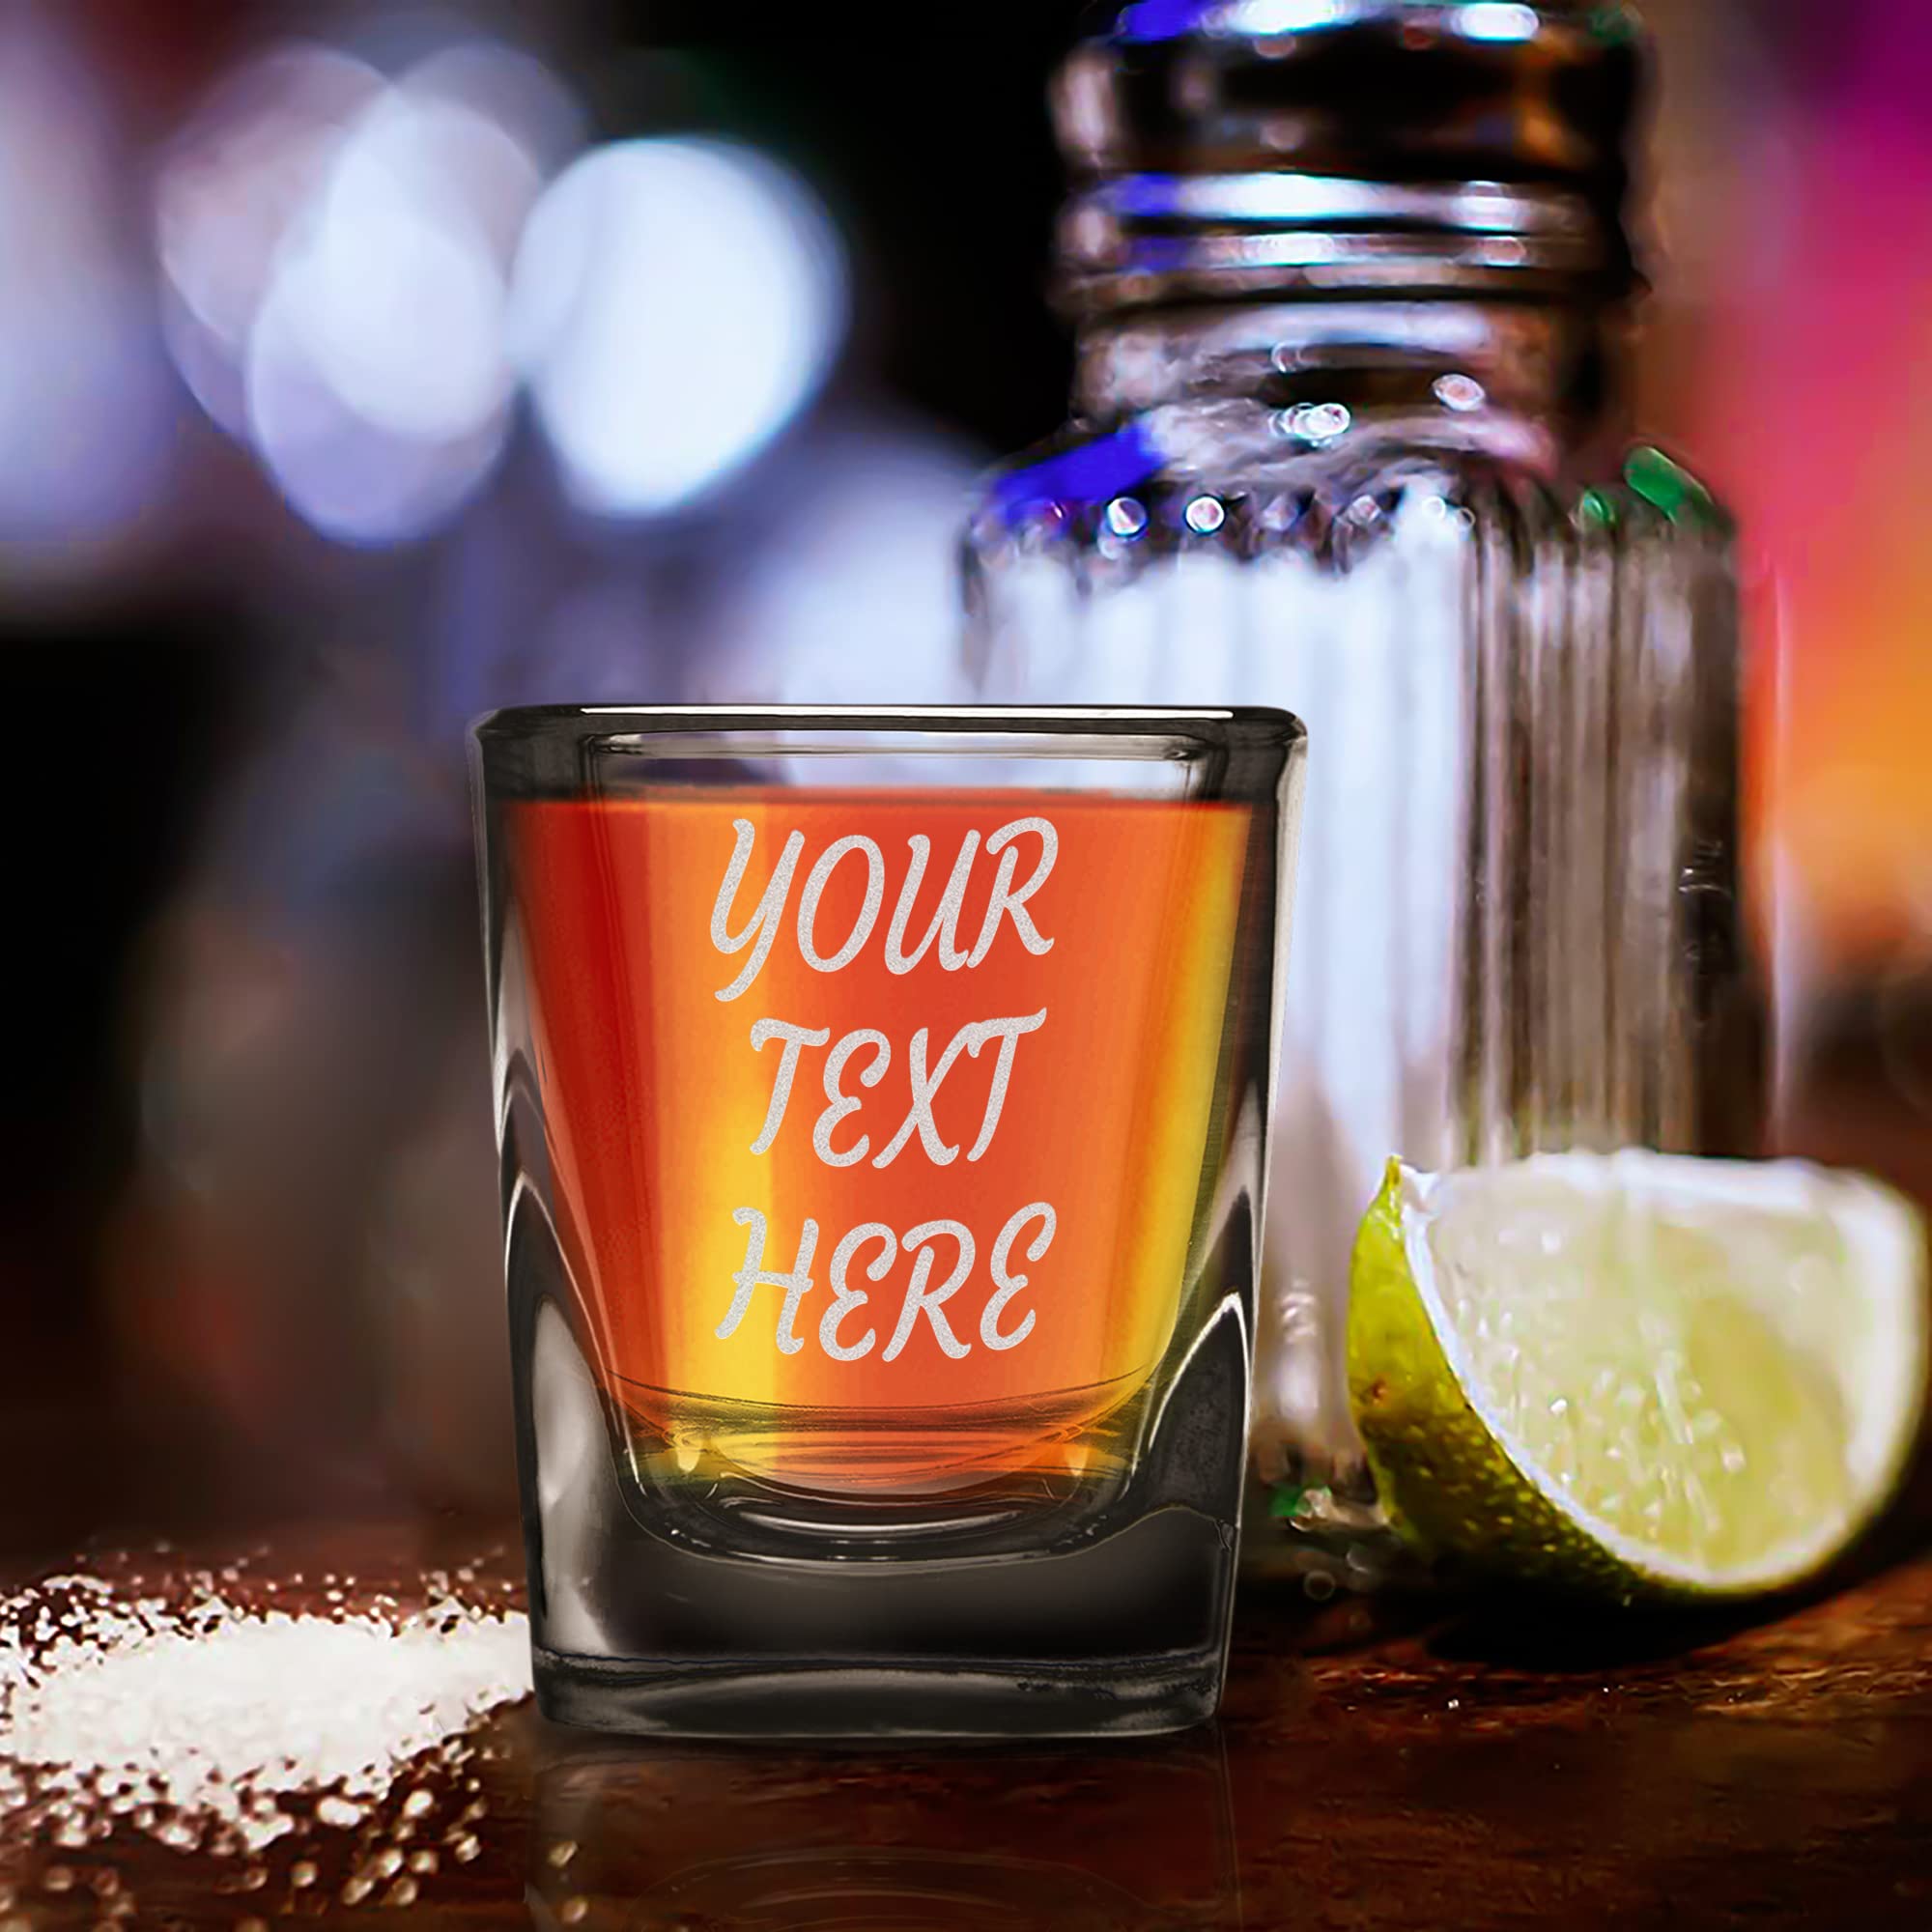 Personalized Your Text Laser Engraved Square Heavy Base Prism Shot Glass 2 oz. with Optional Gift Box, Custom Name Gifts for Him, Her